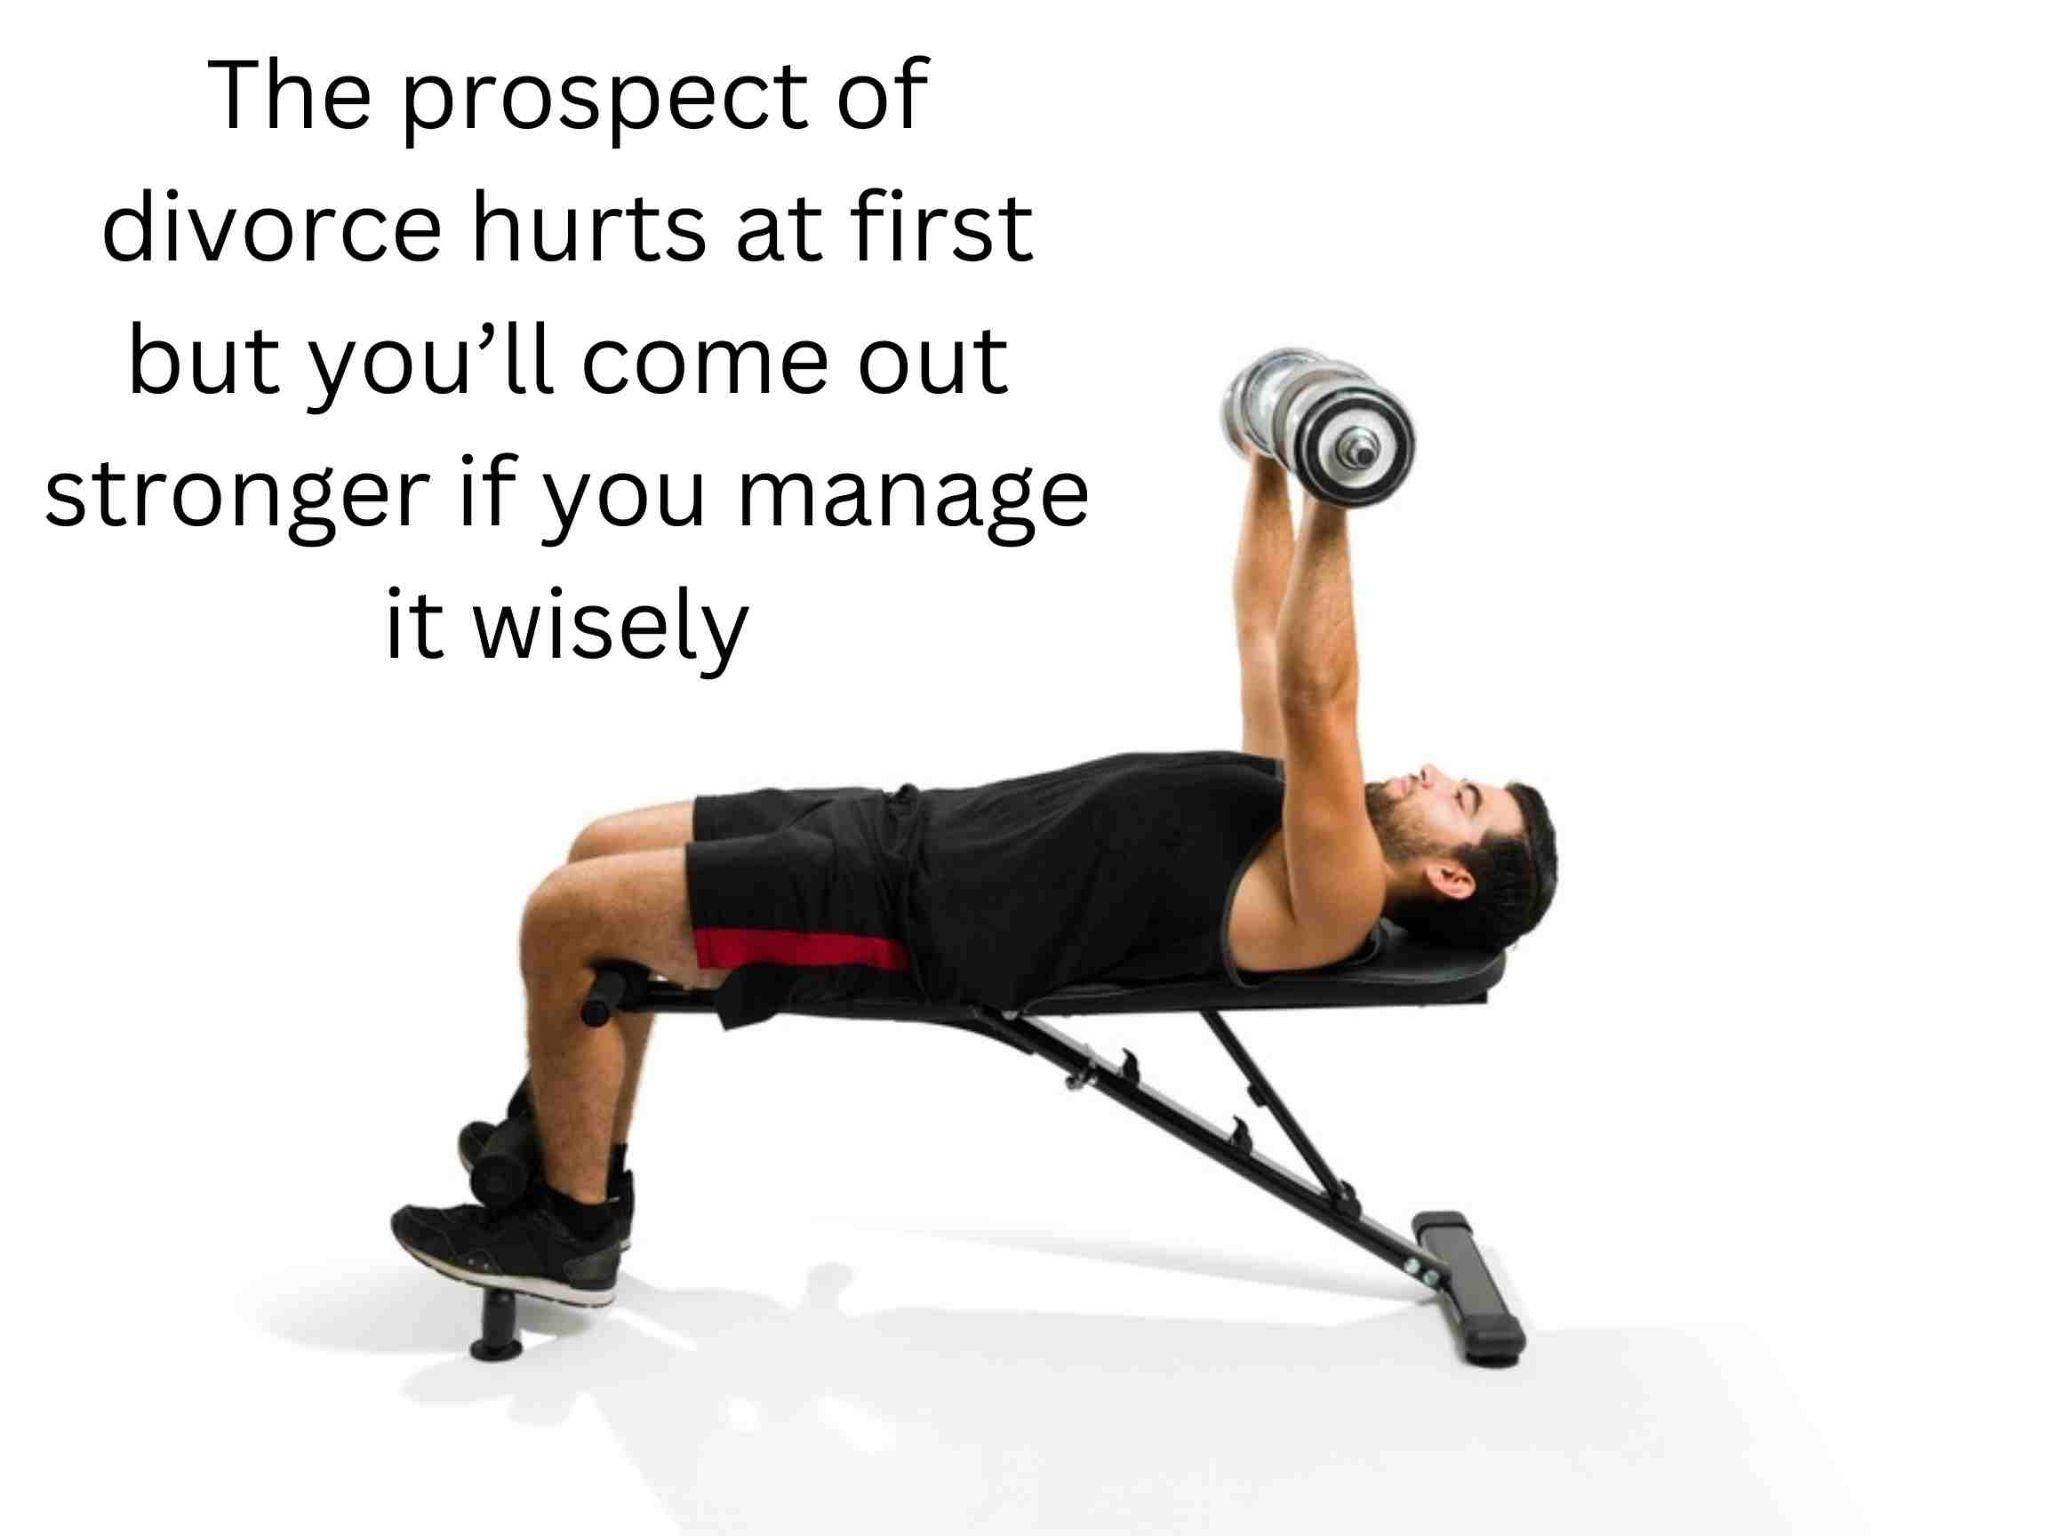 A man lying on a workout bench, lifting a dumbbell with his right arm, set against a white background, with text about overcoming divorce.